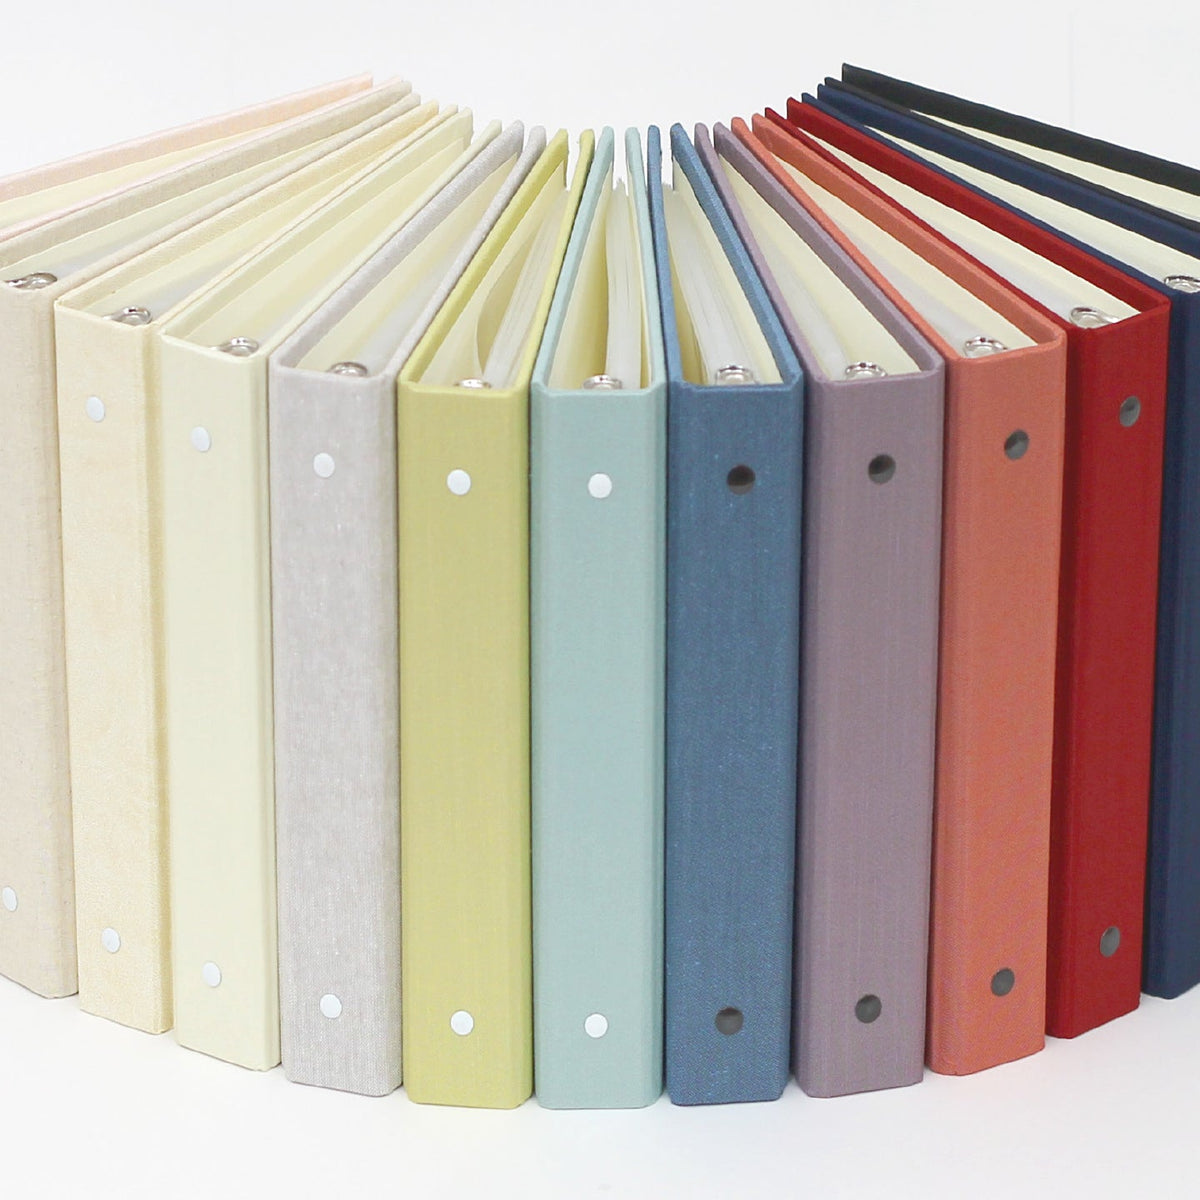 Storage Binder for Photos or Documents with Coral Cotton Cover